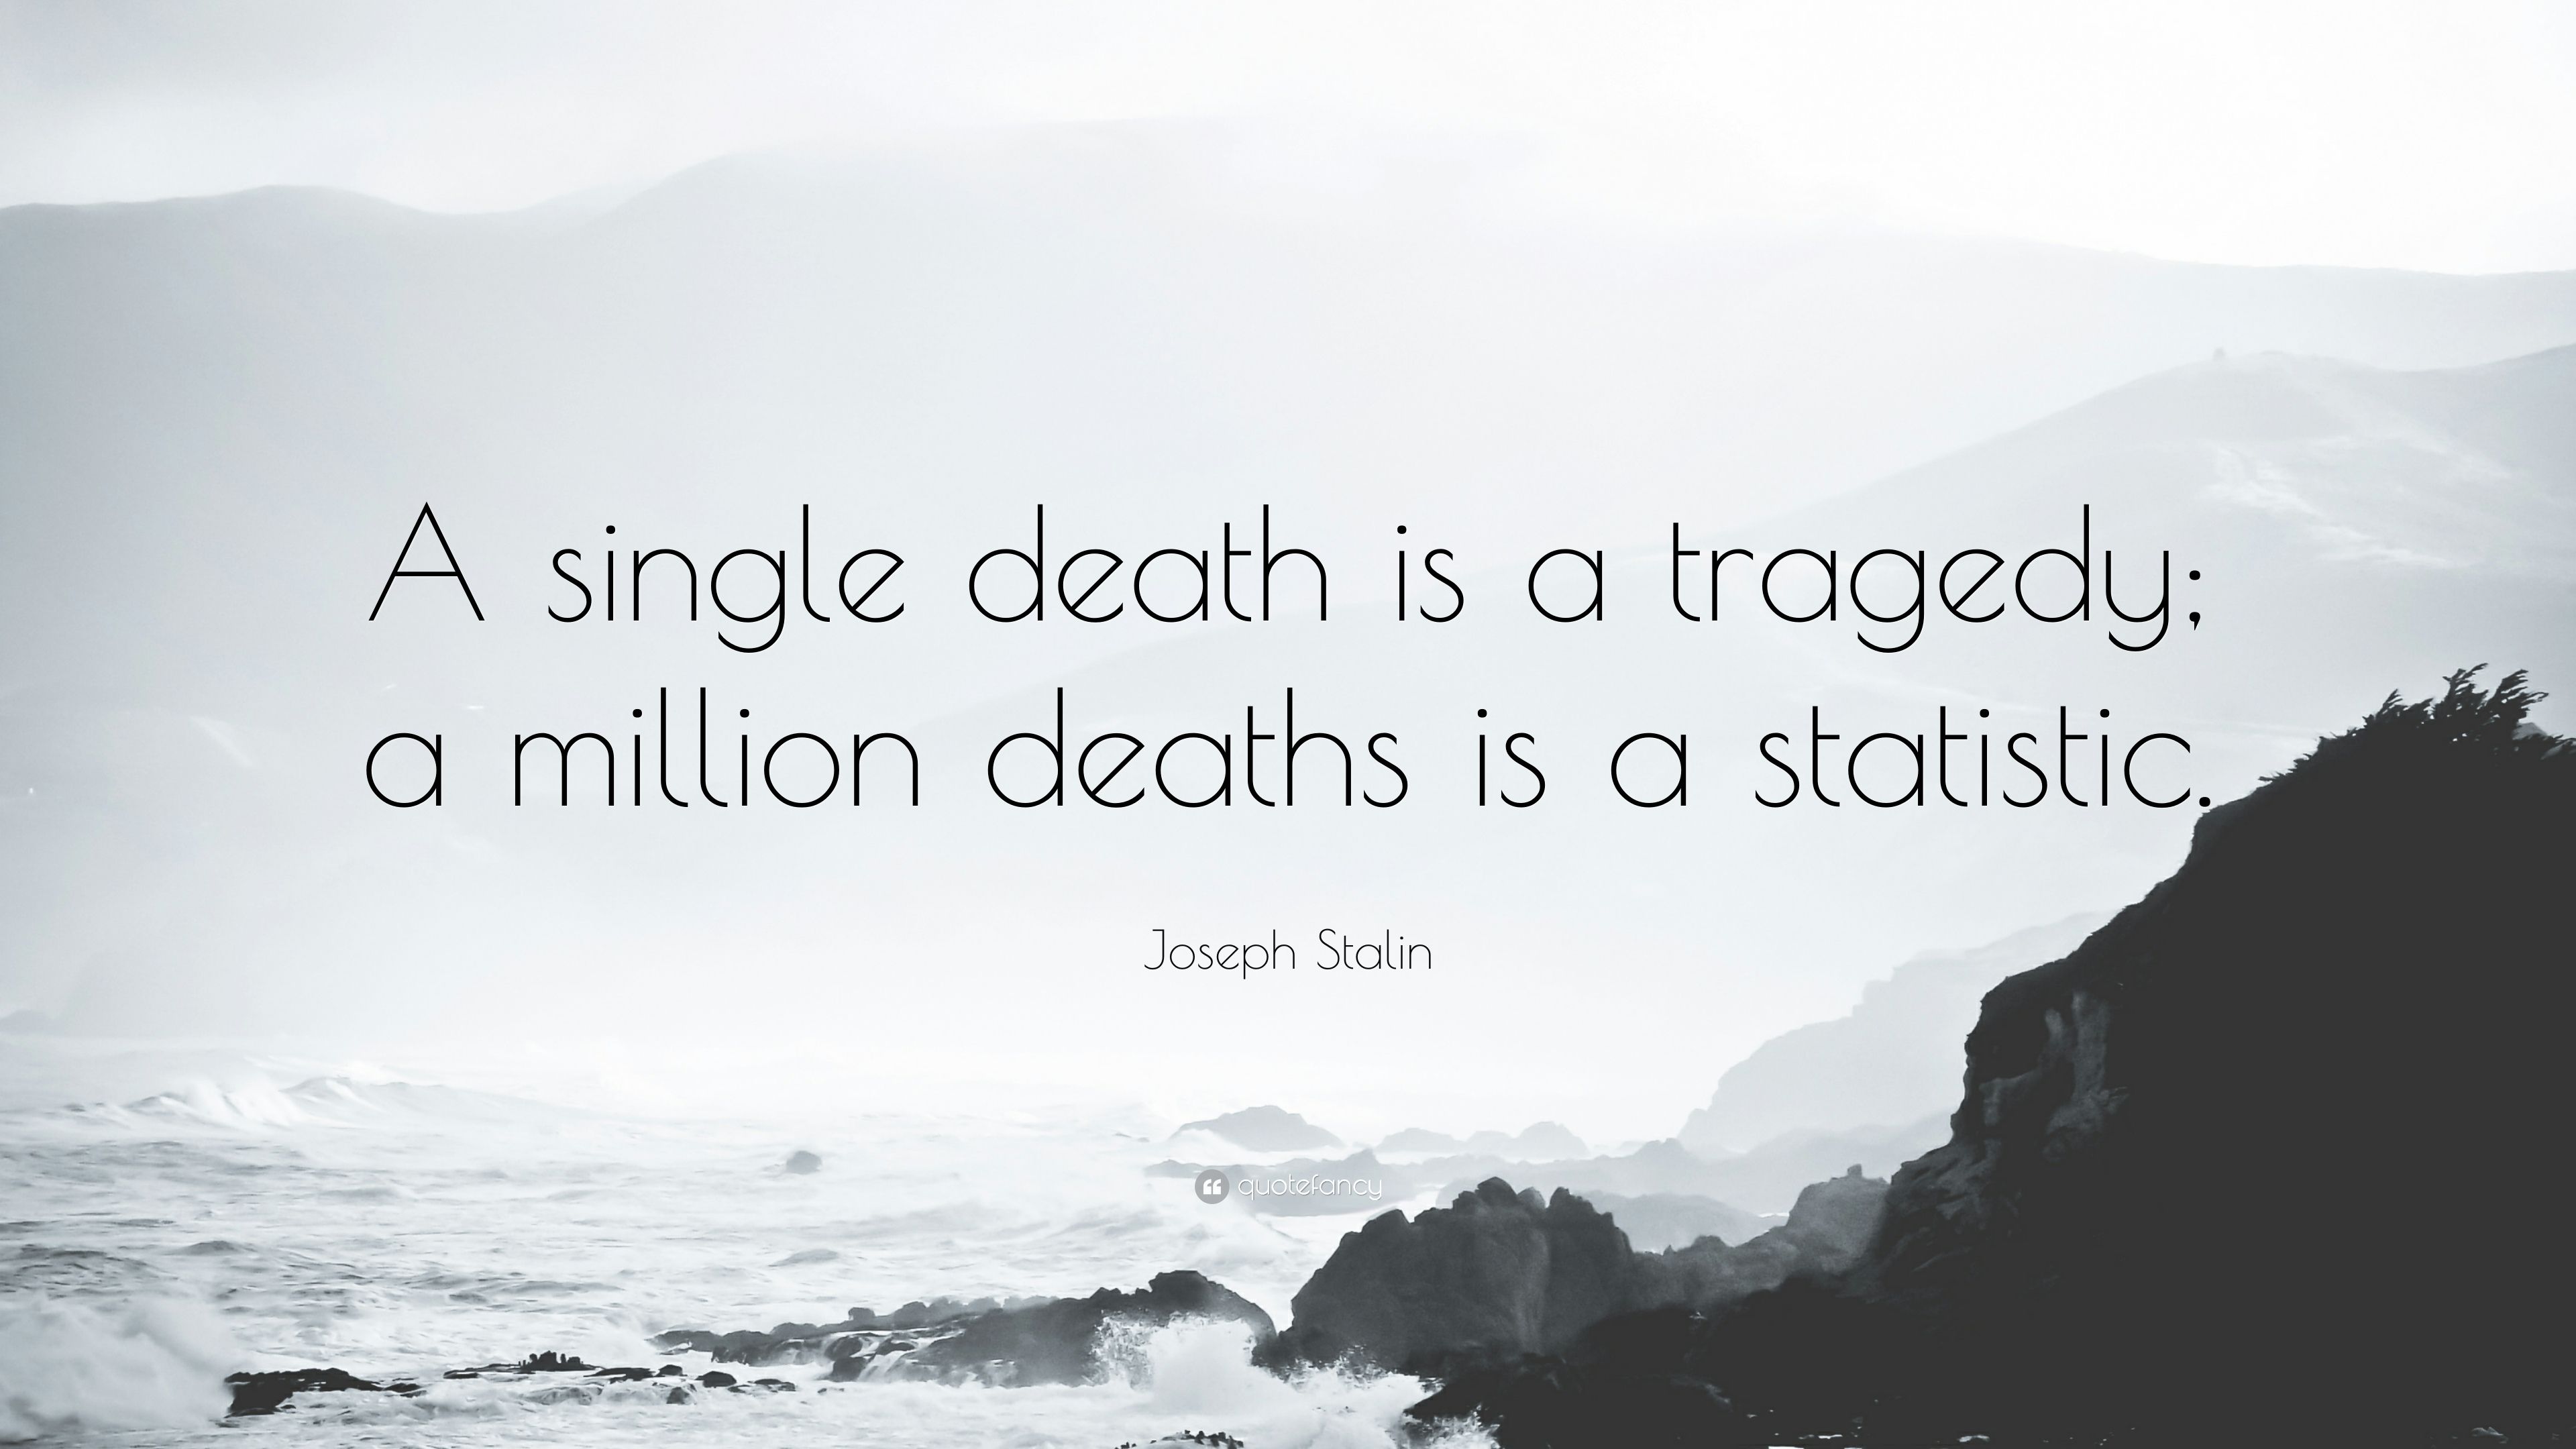 C. S. Lewis Quote: “A single death is a tragedy; a million deaths is a statistic.” (12 wallpaper)